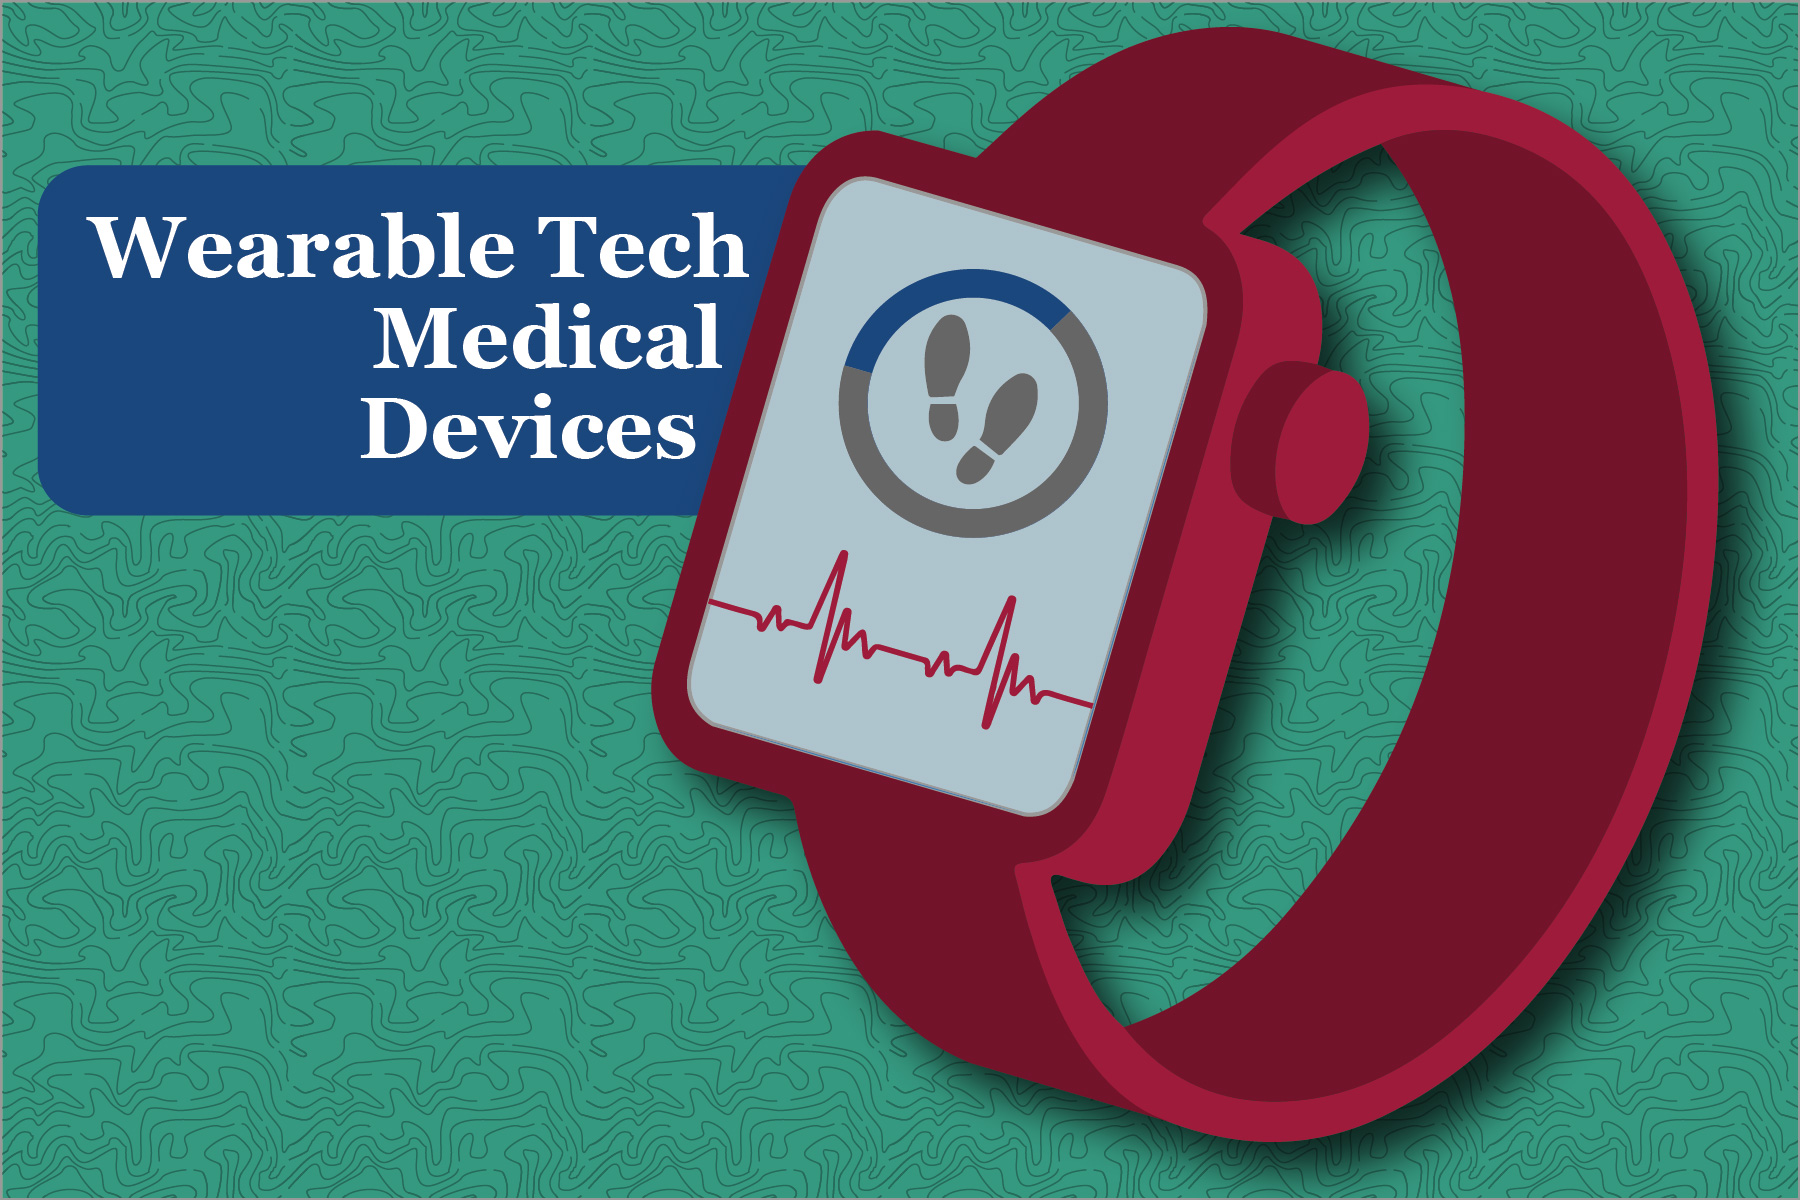 Wearable Tech Medical Devices